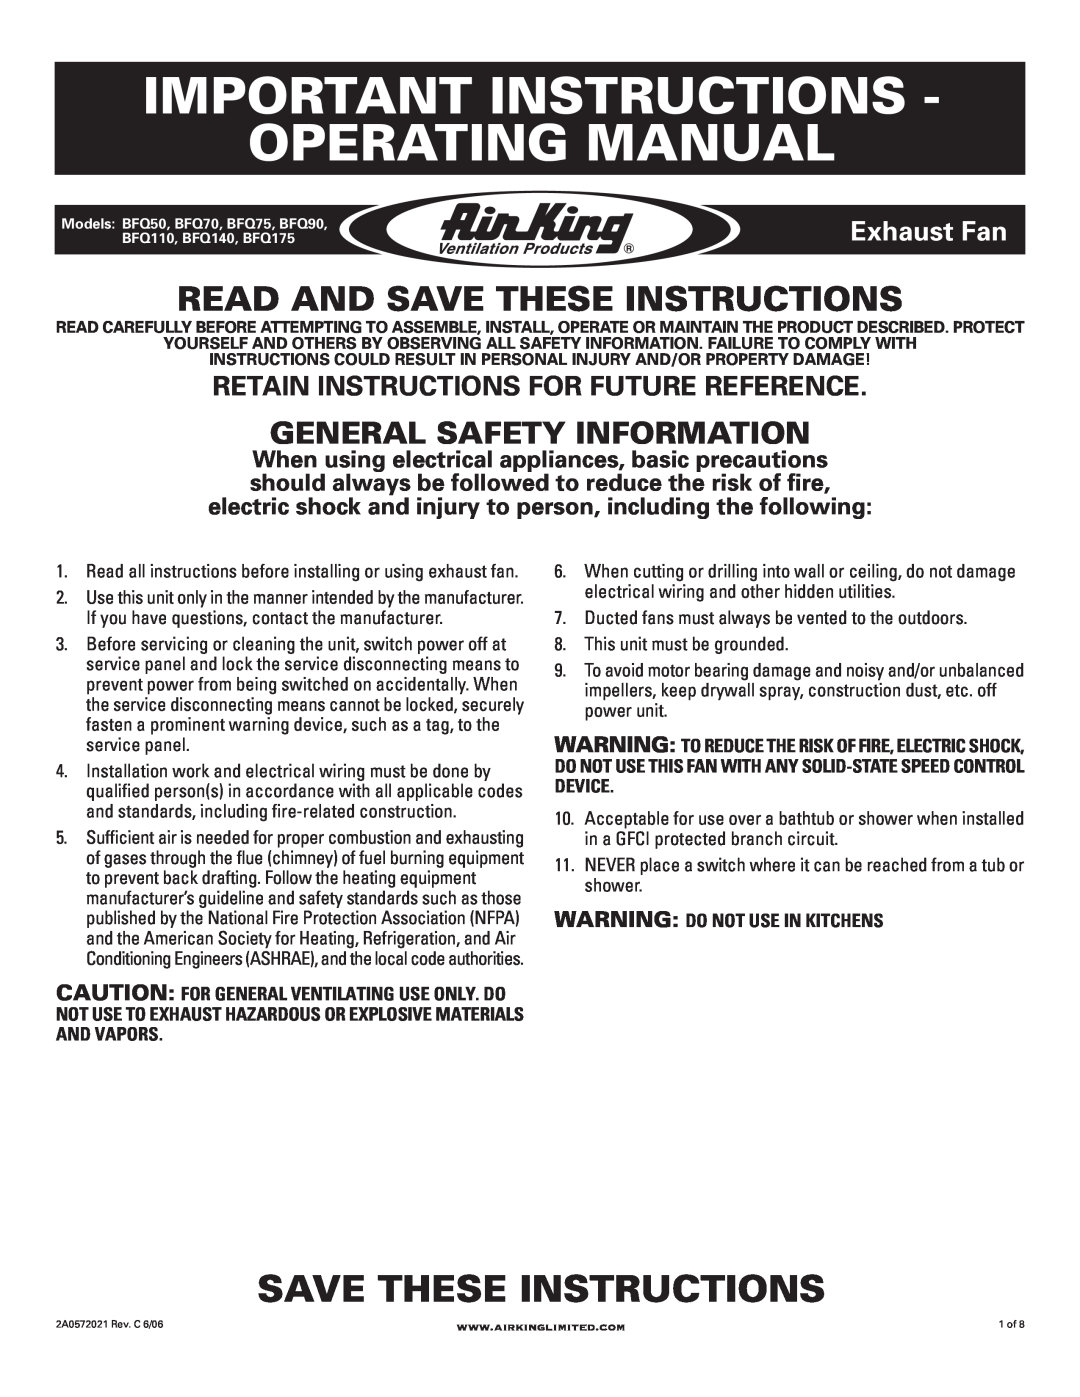 Air King BFQ50, BFQ110 manual Important Instructions Operating Manual, Read And Save These Instructions, Exhaust Fan 